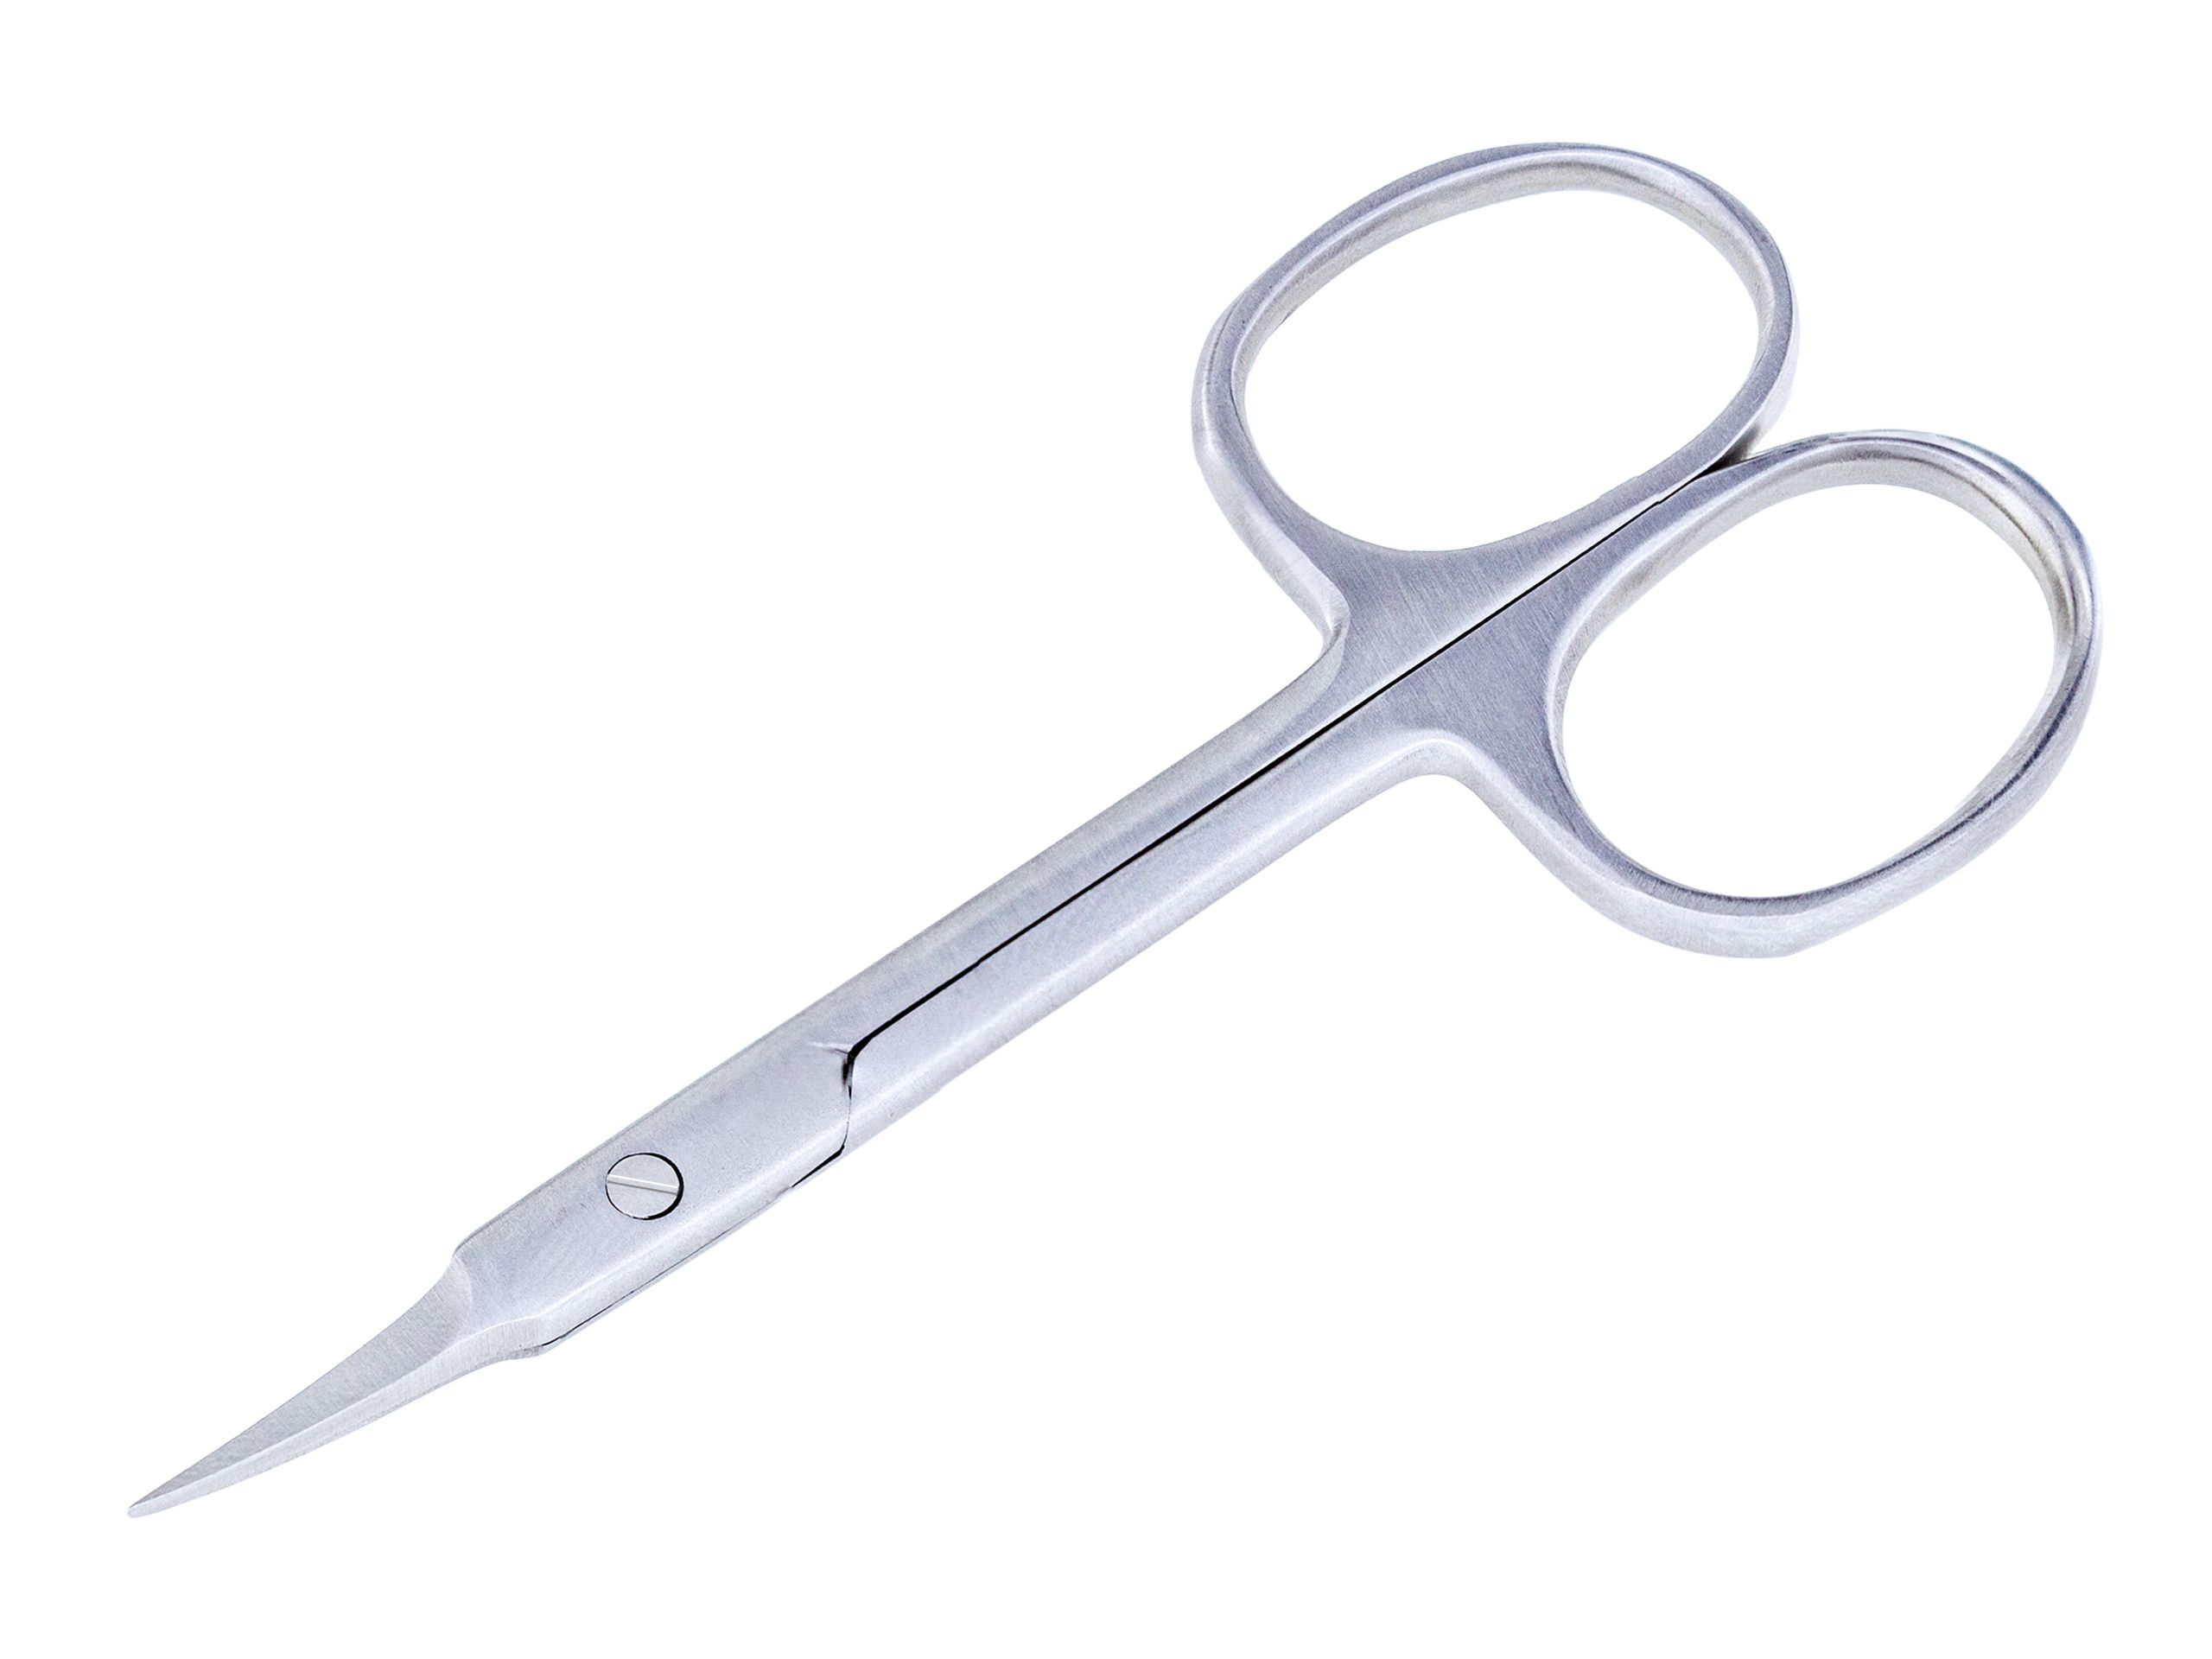 Cuticle Scissors - Made in Germany ✶ European Nail Shop